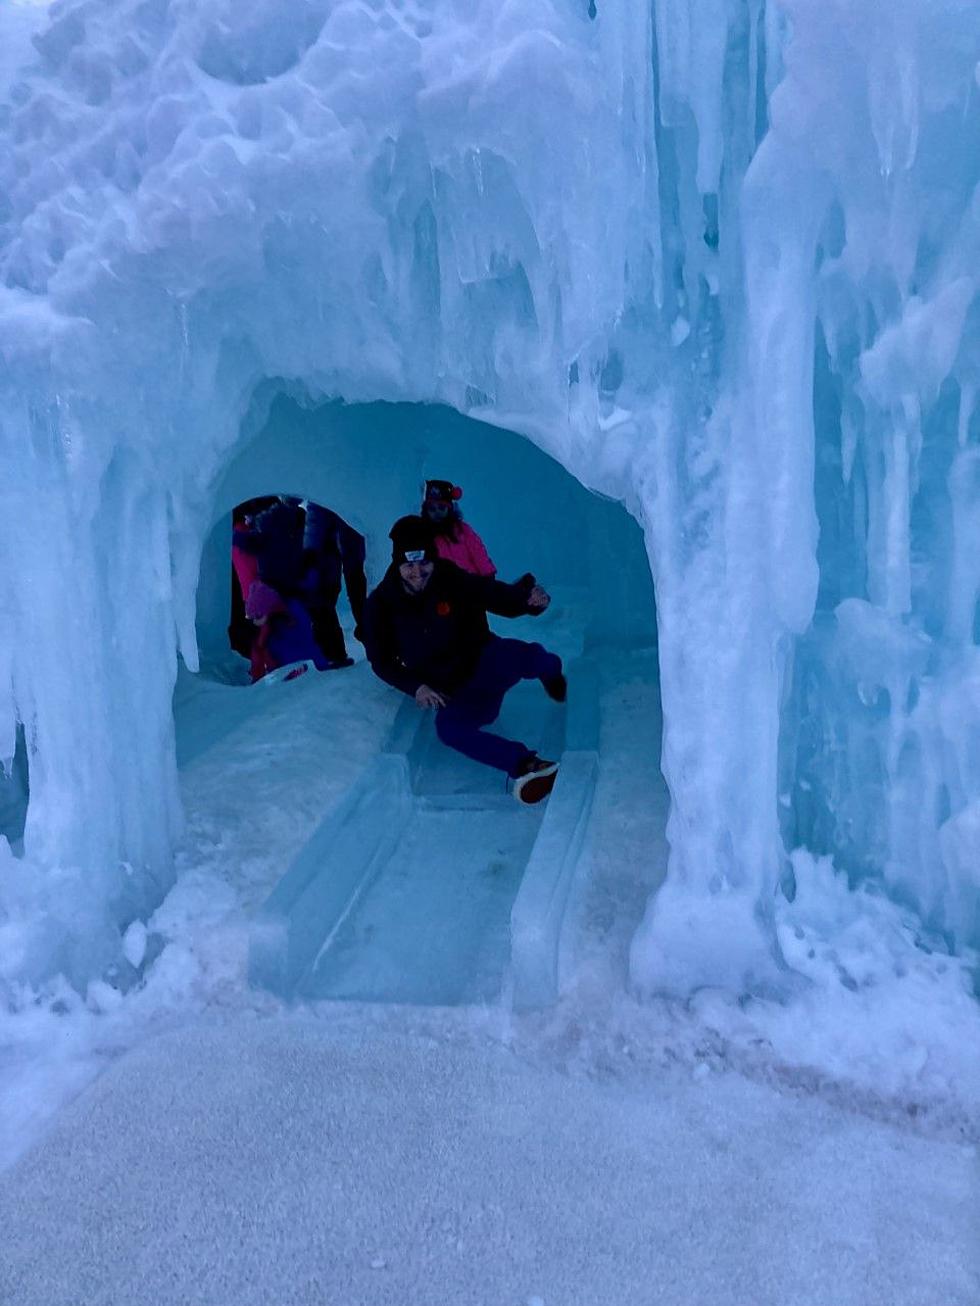 New York Ice Castles Event Sold Out! Or Is It? Here’s Your Best Chance to Get In